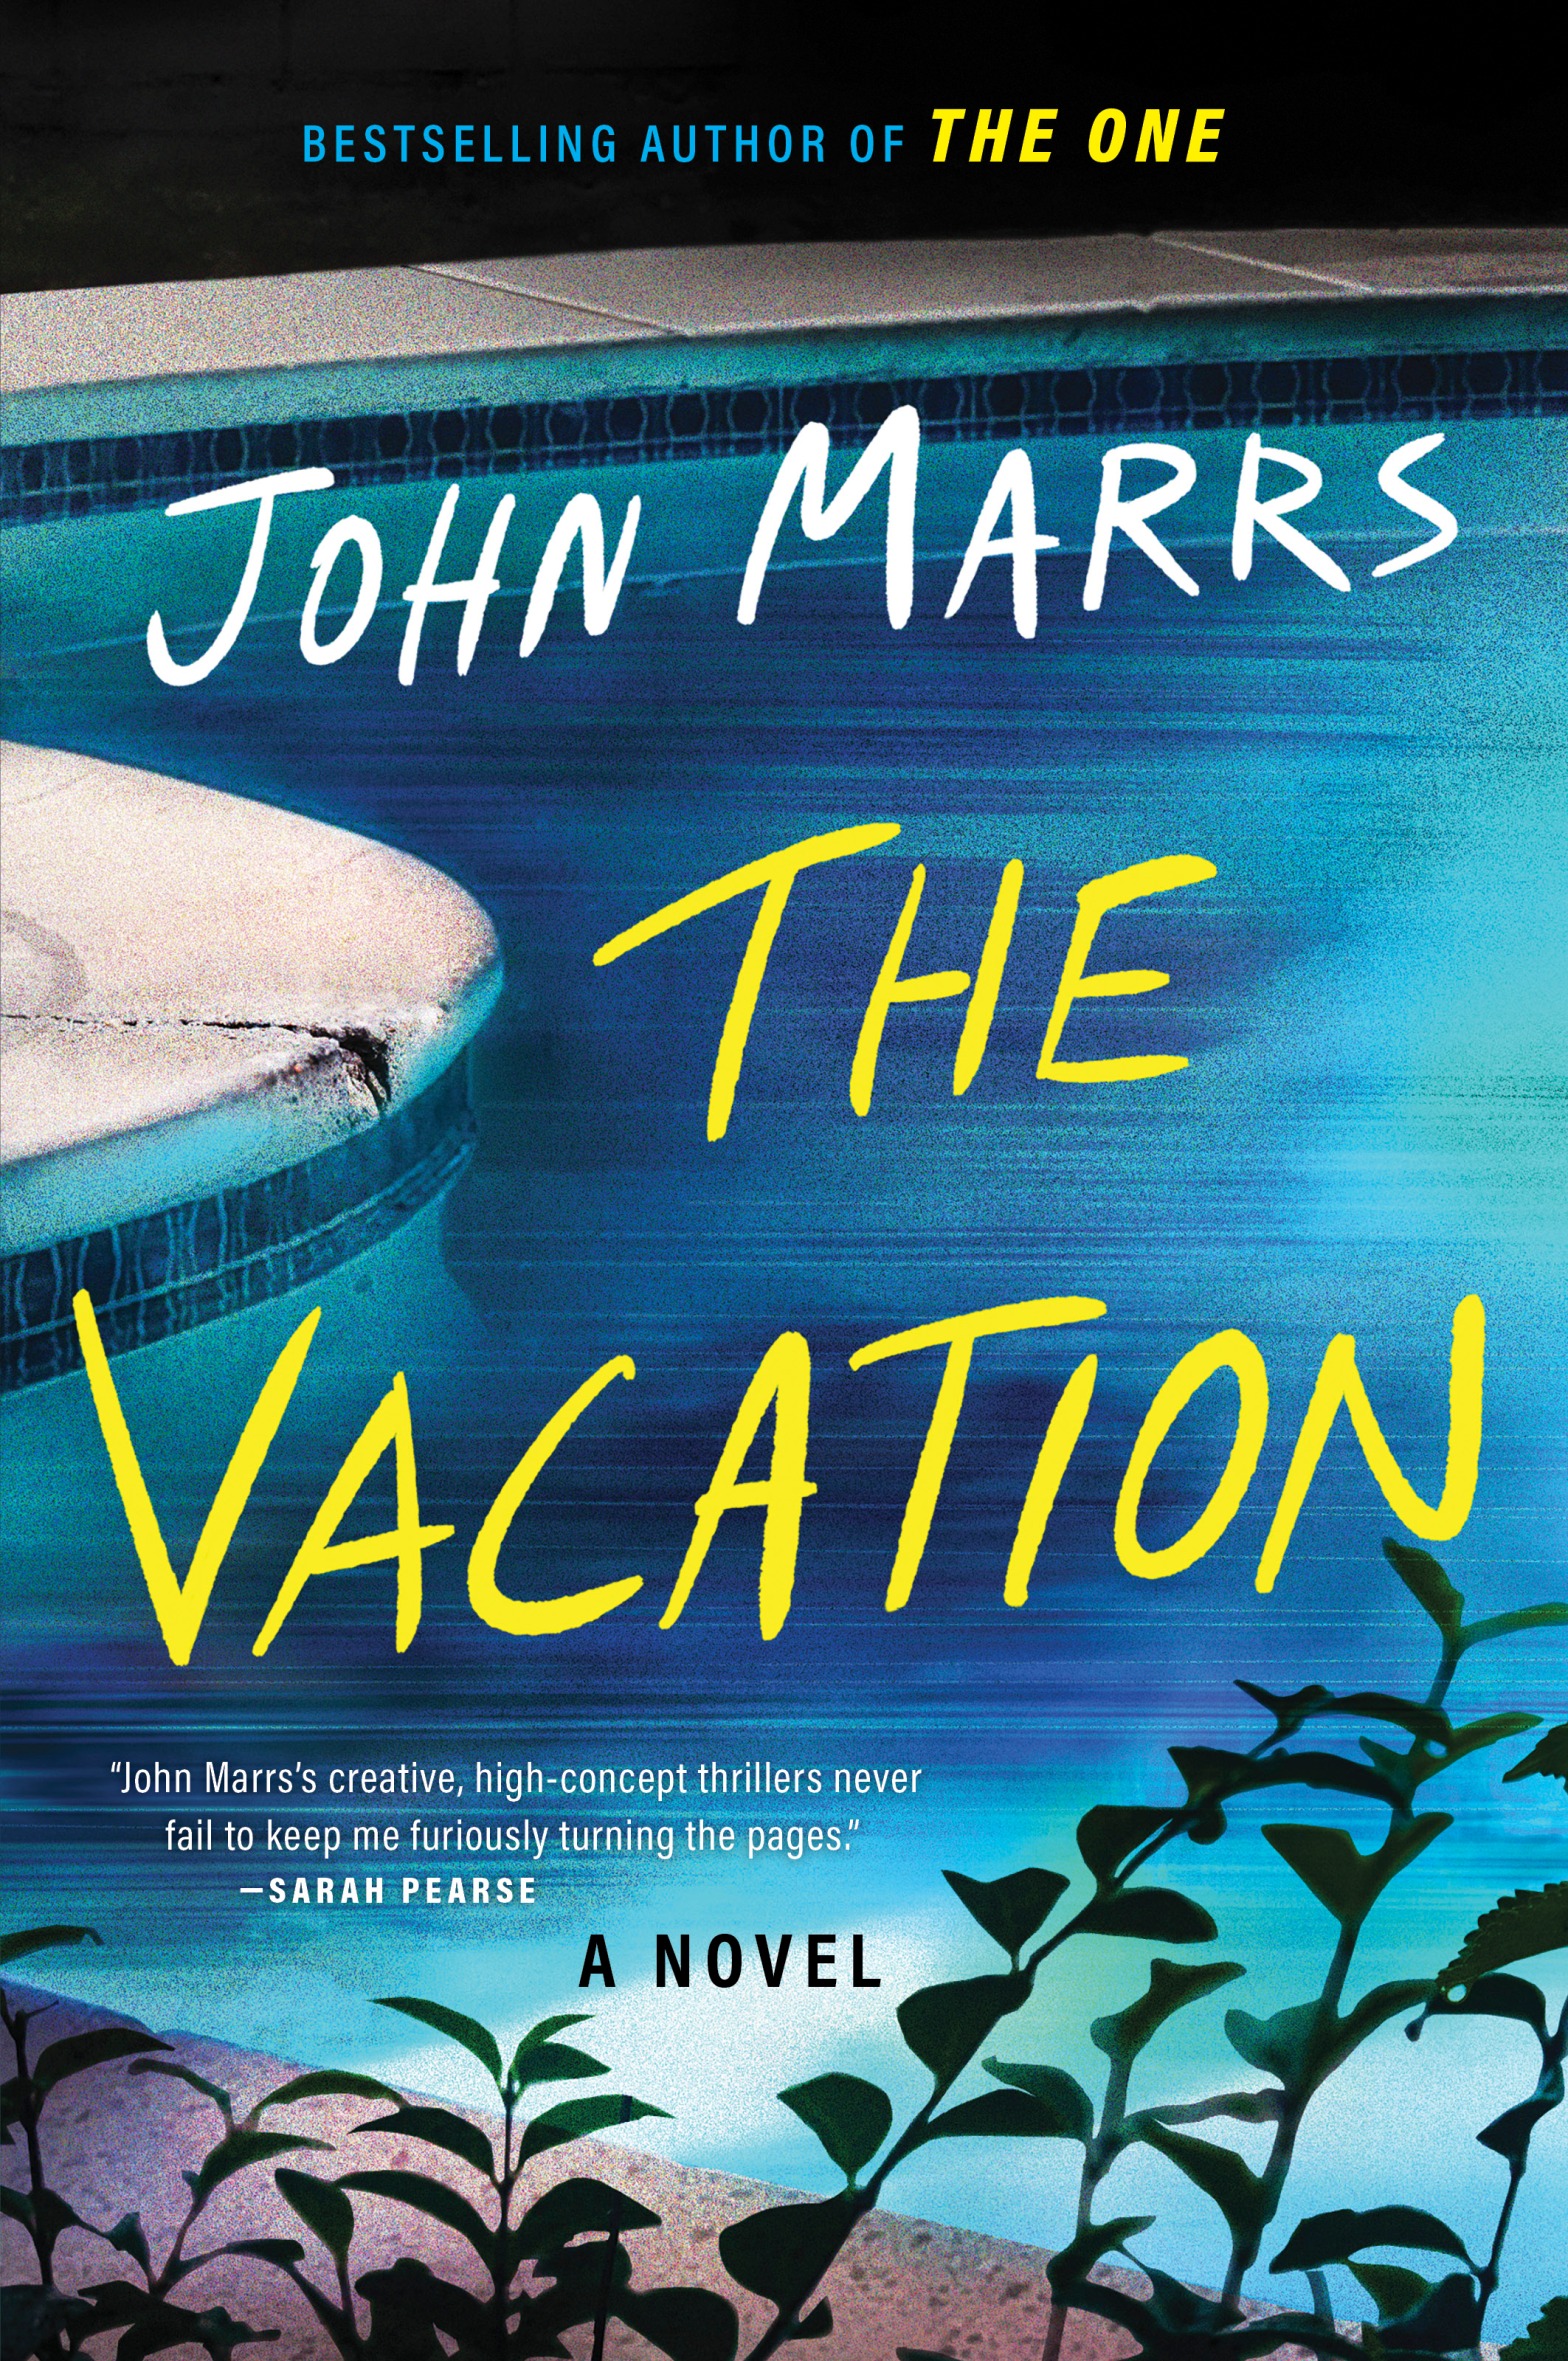 THE VACATION by John Marrs blog tour and excerpt